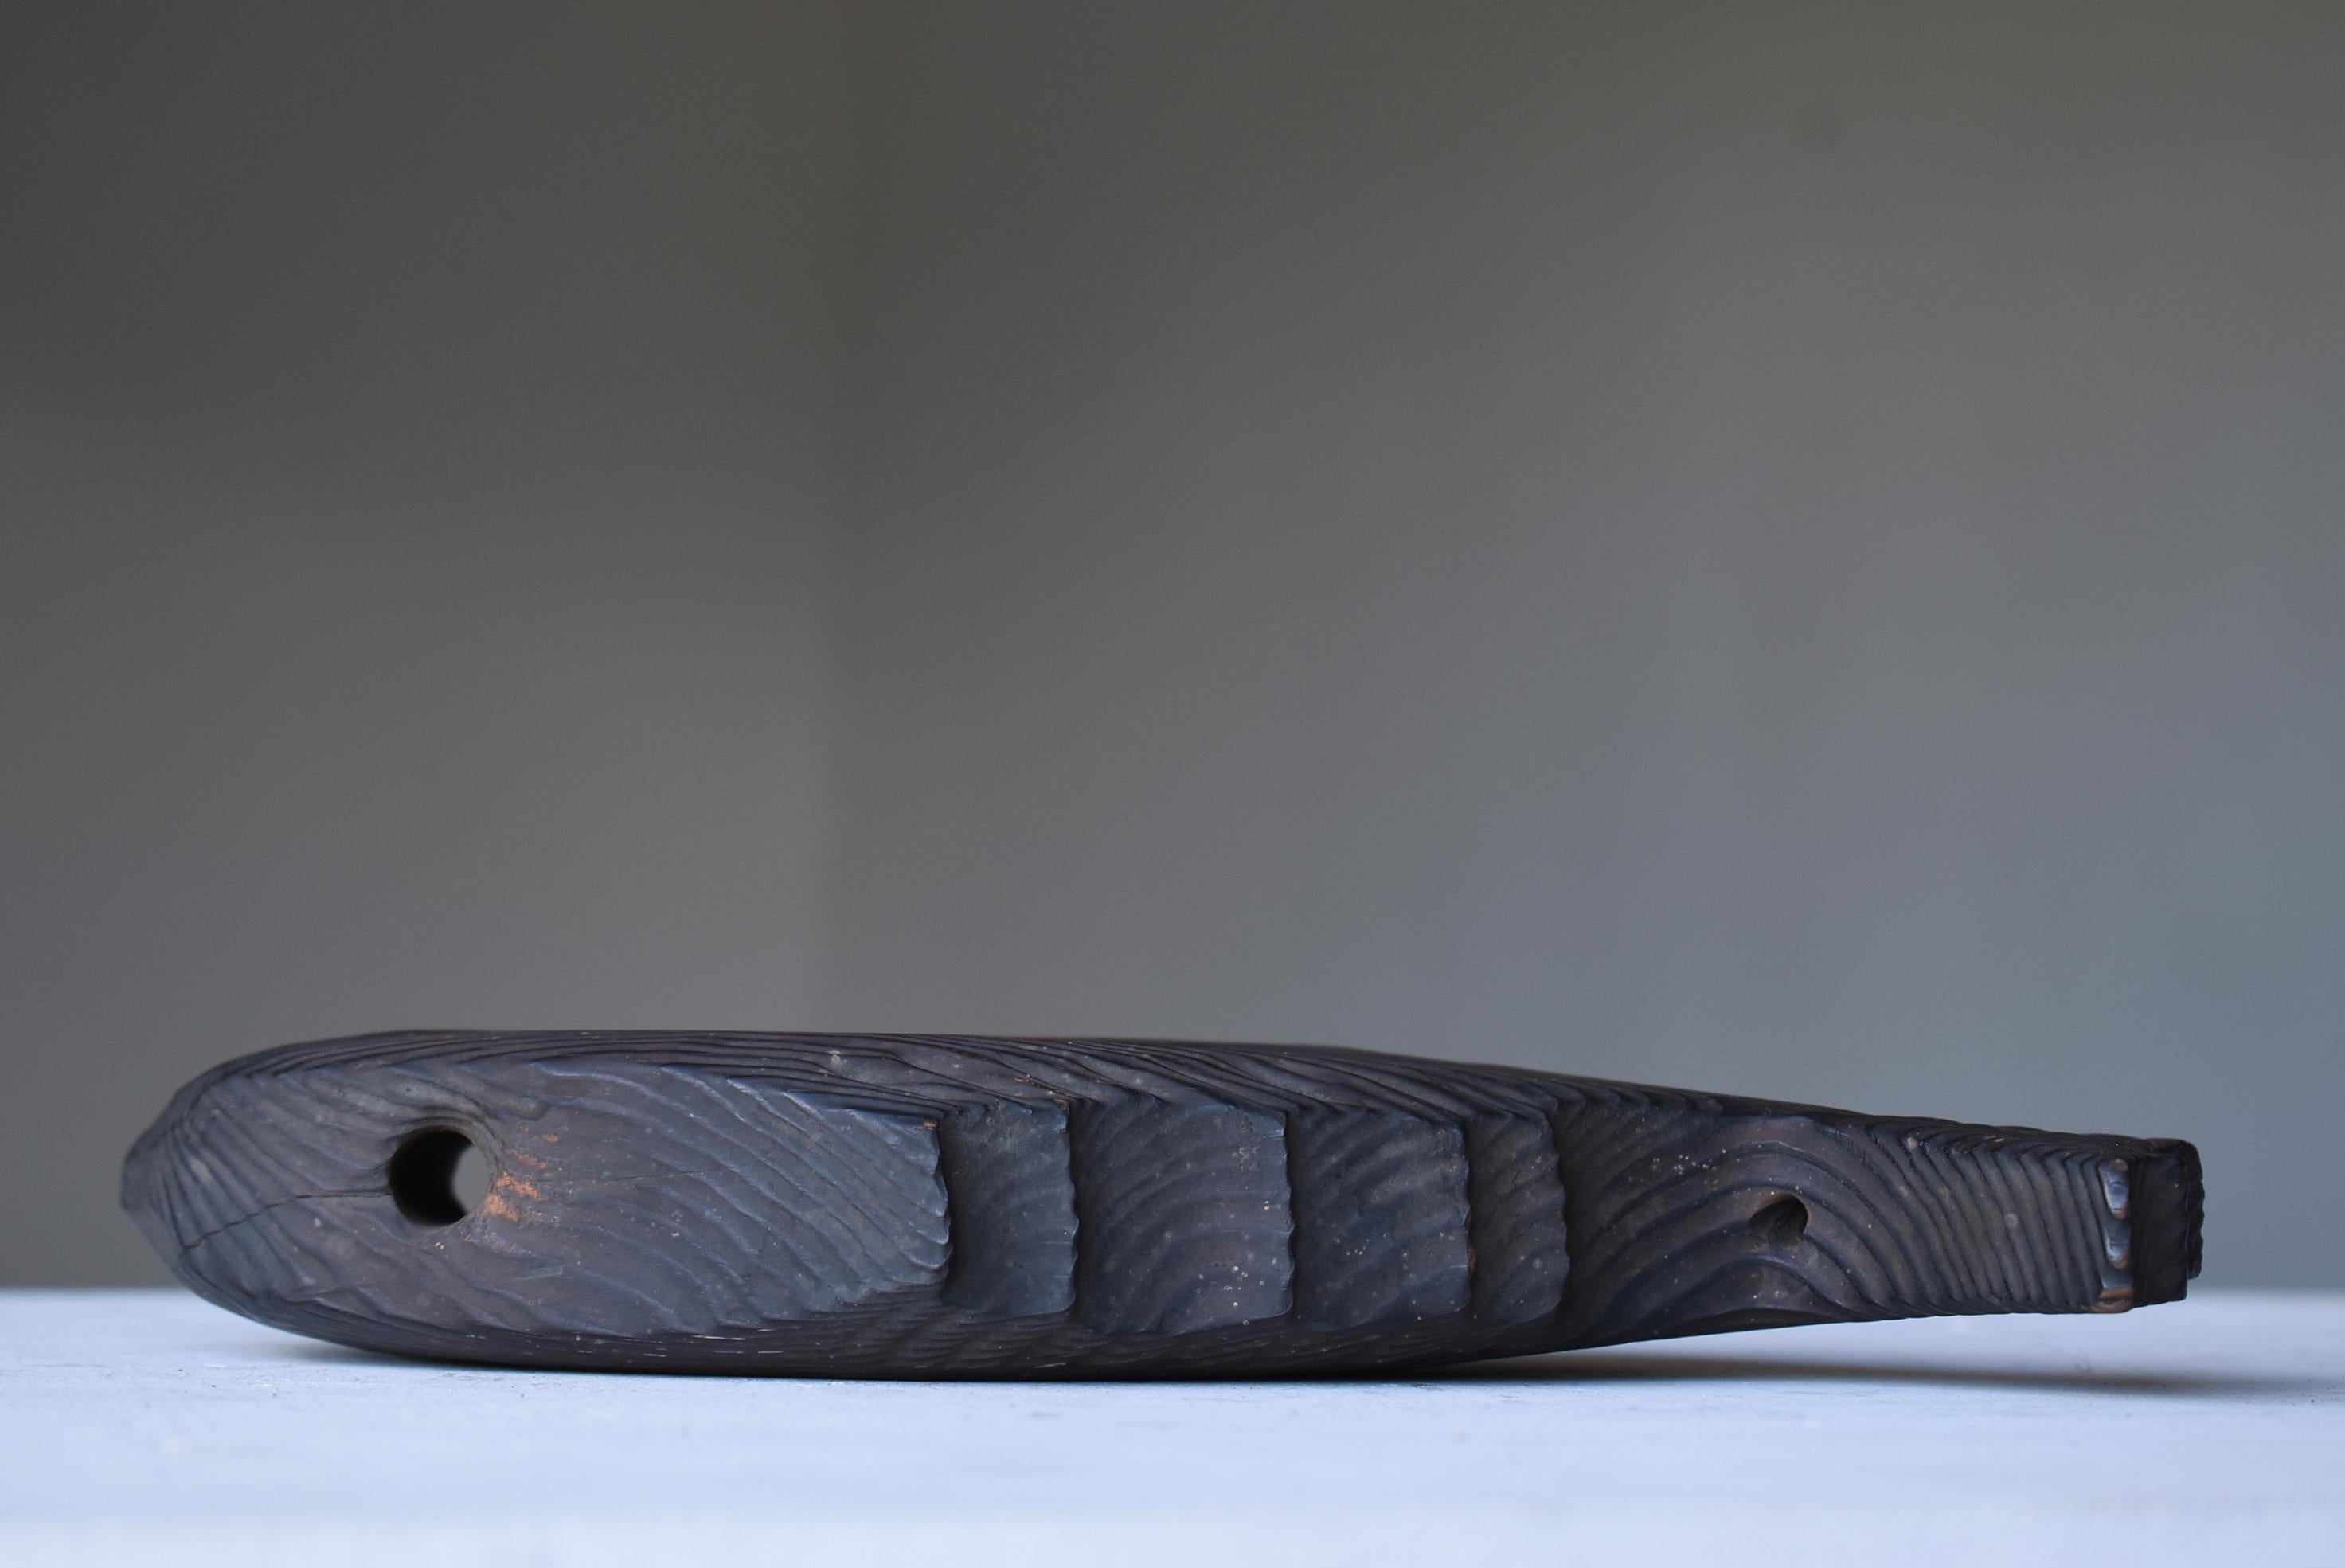 Japanese Antique Wood Carving Fish 1860s-1900s / Mingei Figurine Object Wabisabi For Sale 9